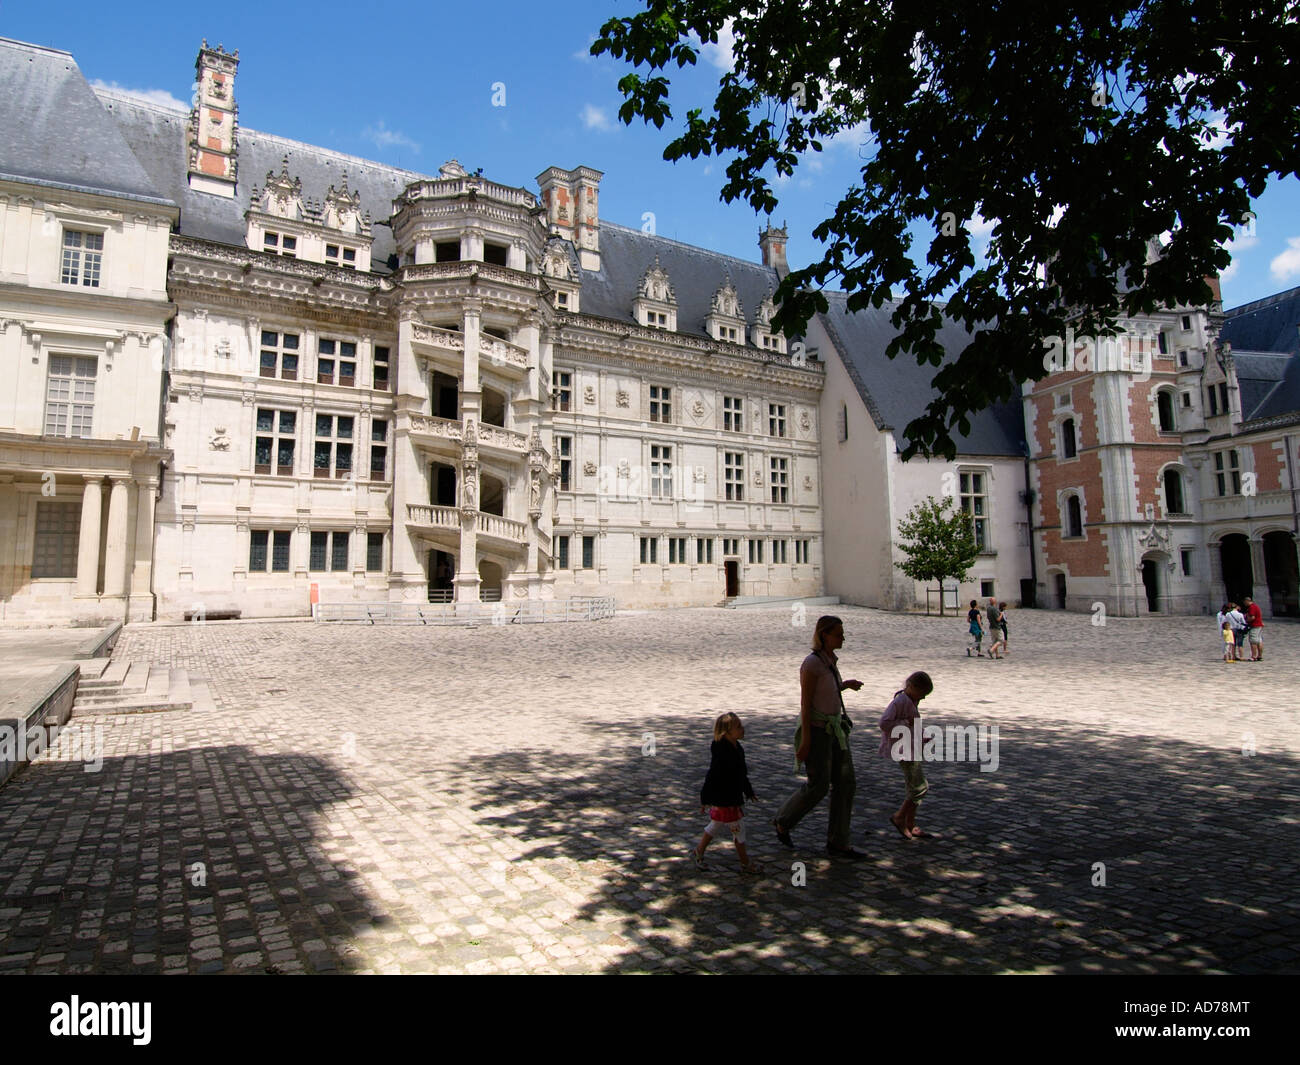 Courtyard of the Blois chateau castle Loire Valley France Stock Photo